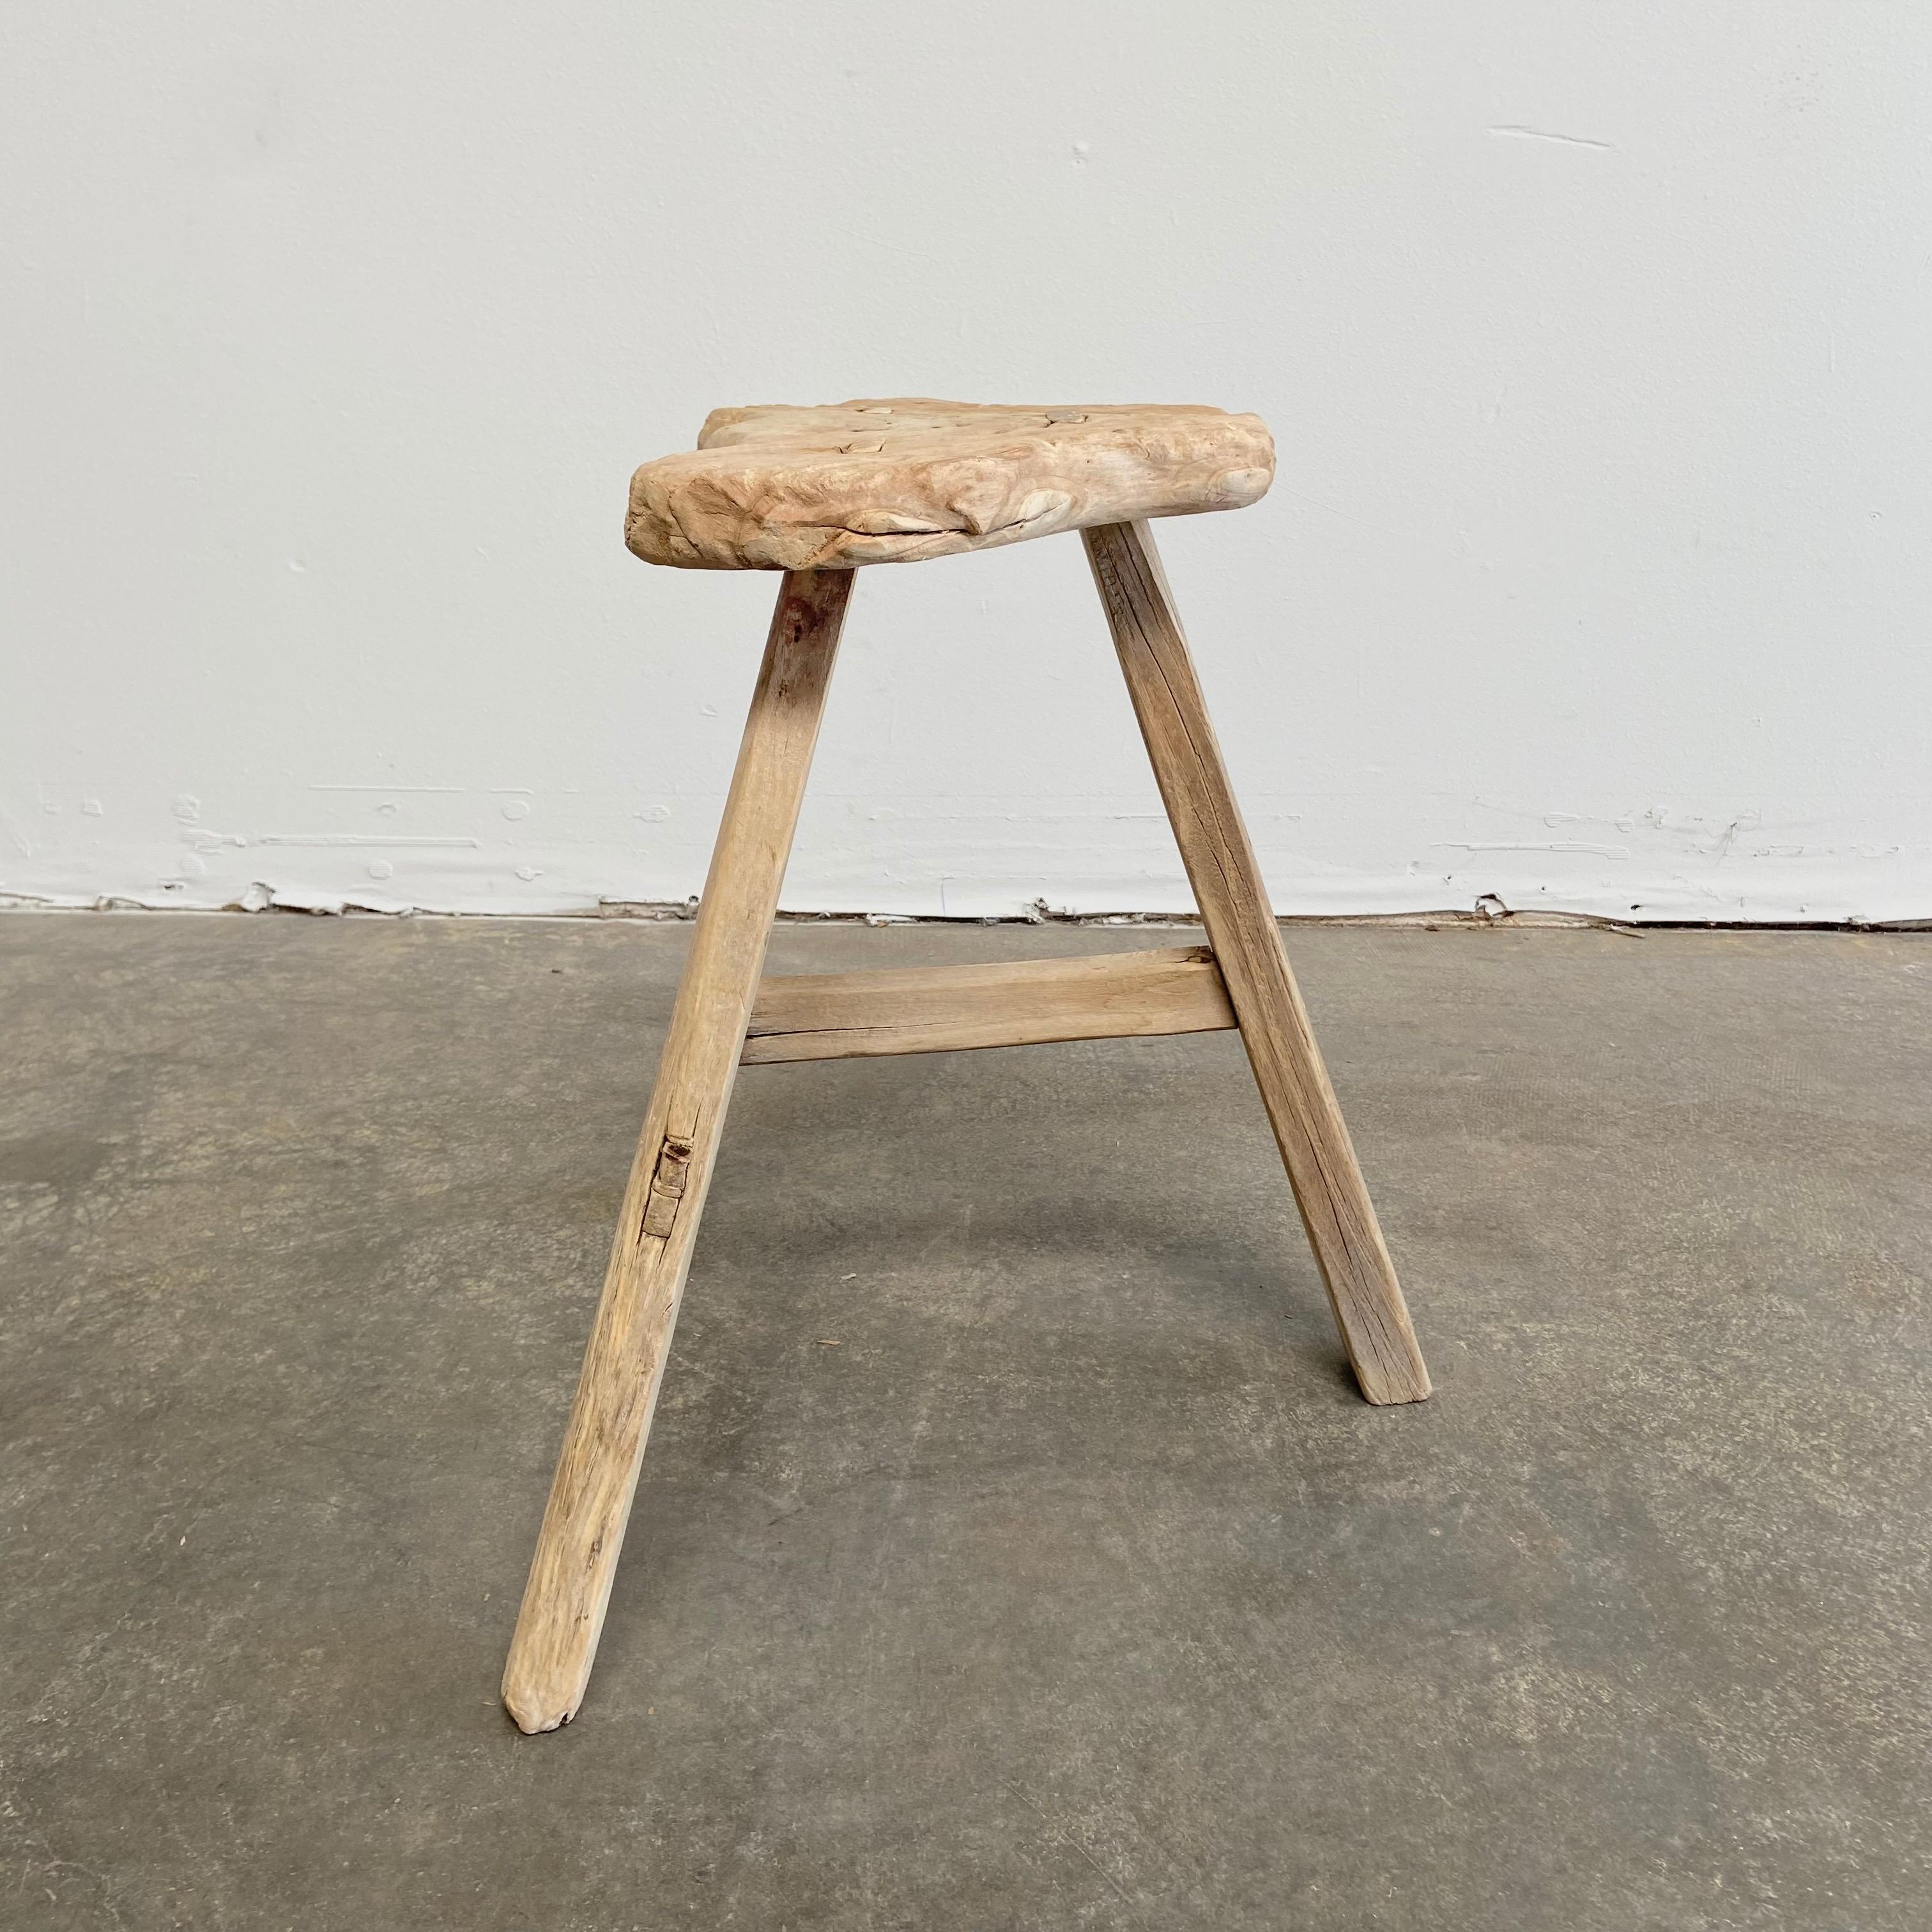 Vintage / antique elm wood stool
These are the real vintage antique elm wood stools! Beautiful antique patina, with weathering and age, these are solid and sturdy ready for daily use, use as a table, stool, drink table, they are great for any